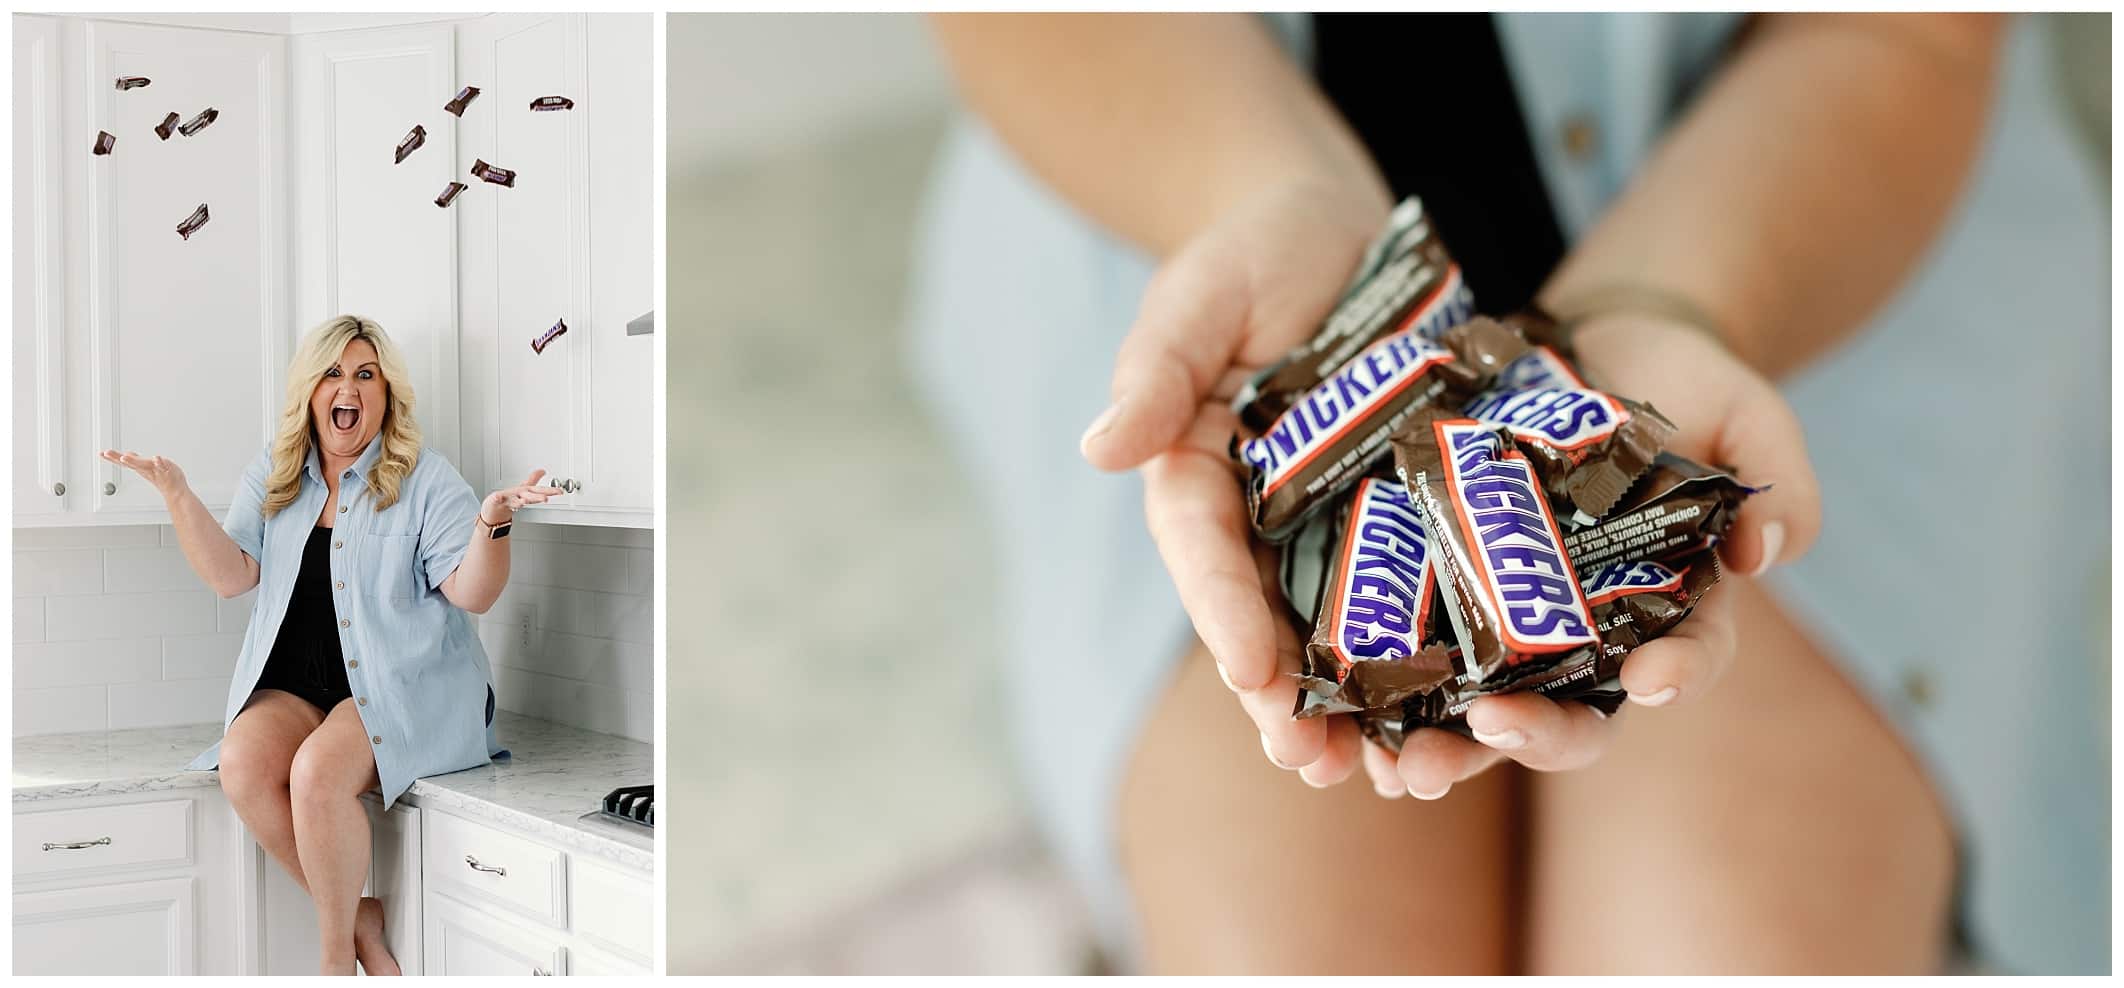 A woman is holding a snickers bar in front of a kitchen. Women Tossing snicker bars like confetti.